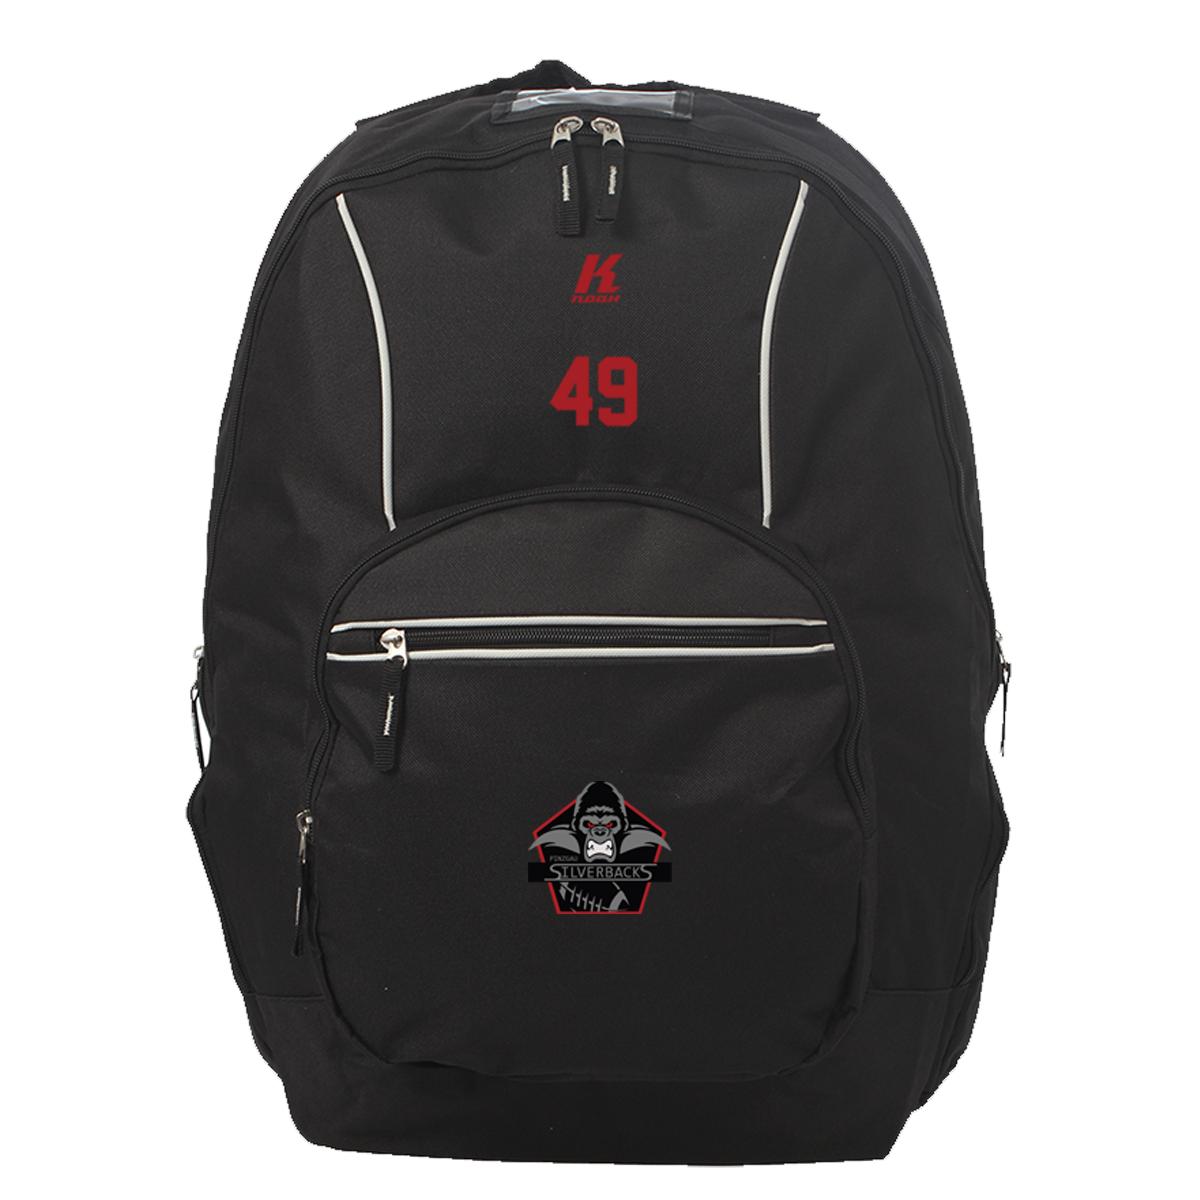 Silverbacks Heritage Backpack with Playernumber or Initials